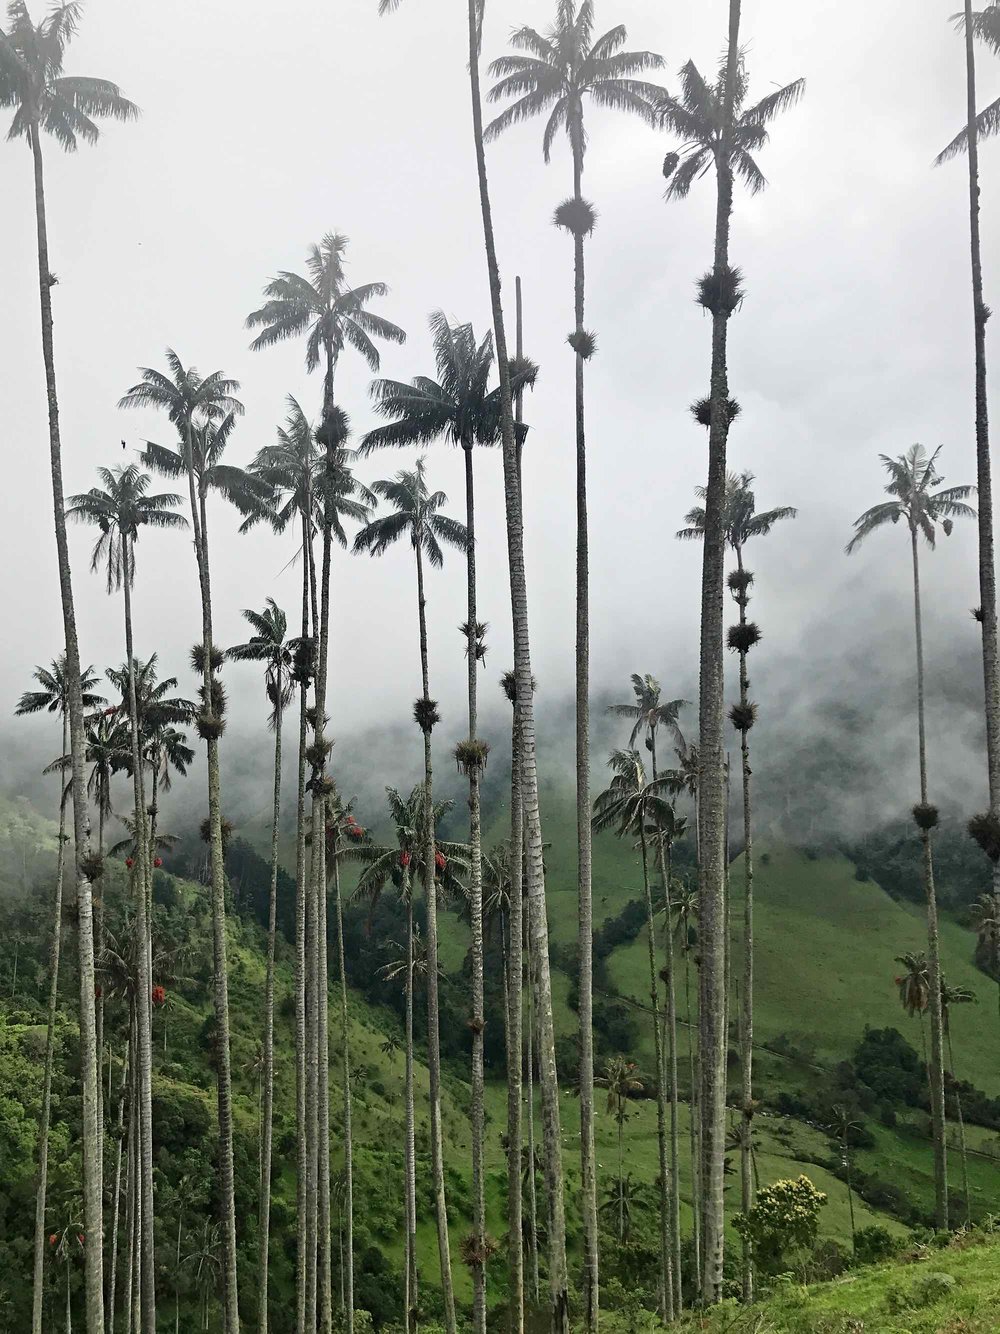 Wax palm trees | Cocora Valley, Colombia